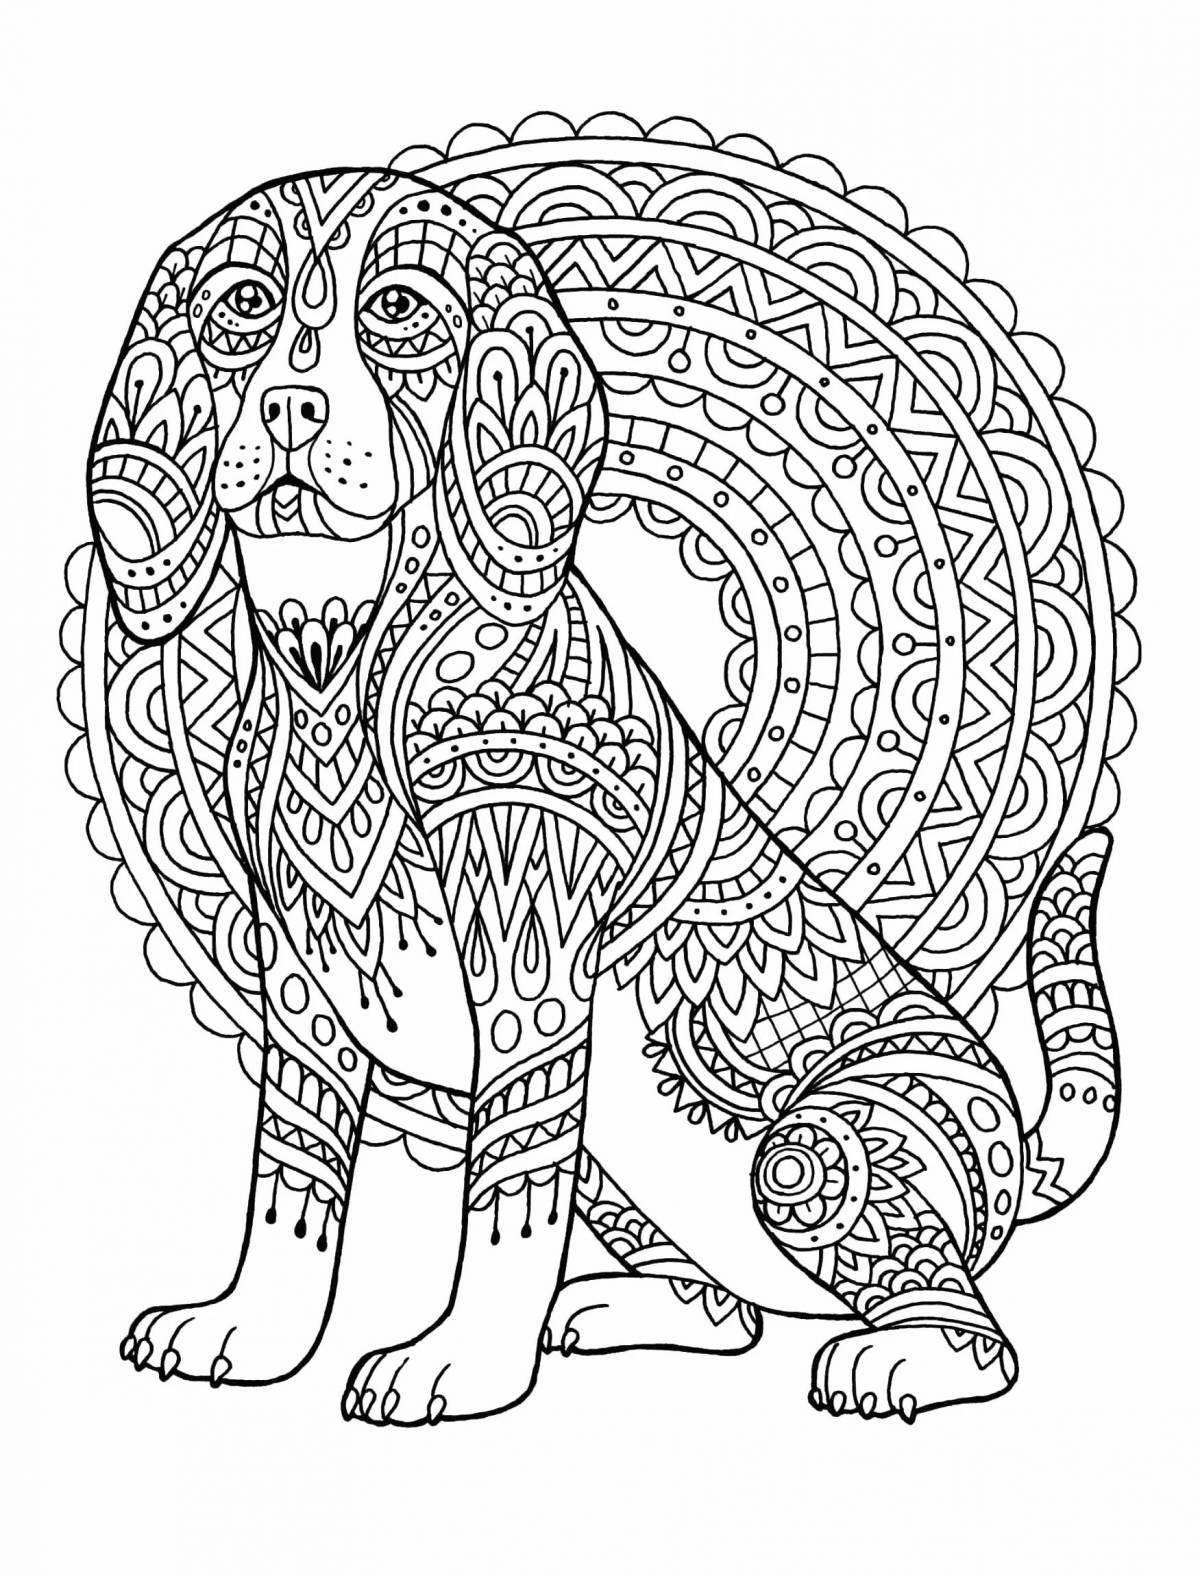 Coloring page unusual dog